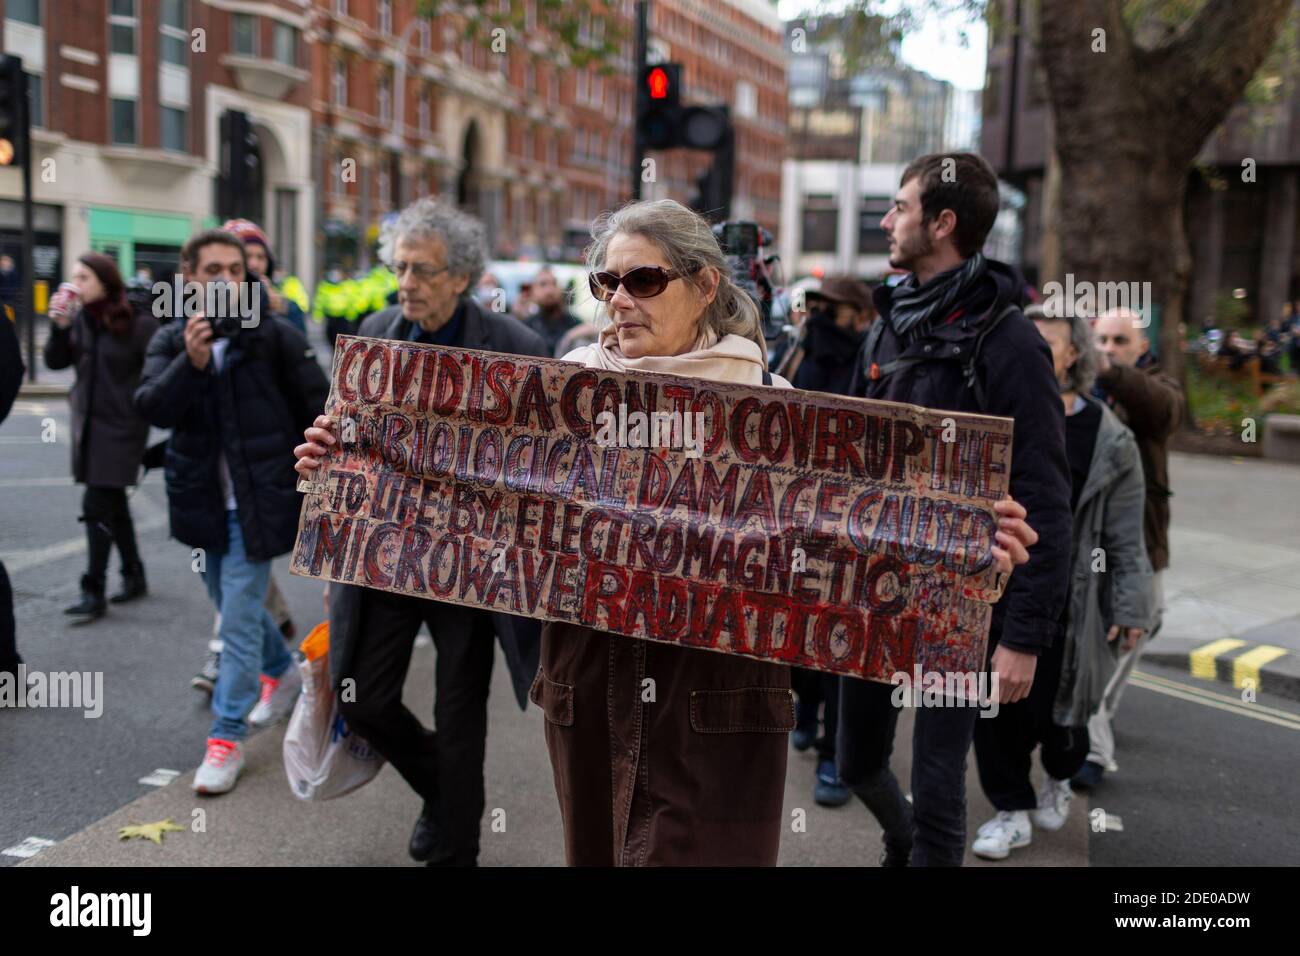 Protester marching with a placard during anti-vaccination protest, Victoria, London, 24 November 2020 Stock Photo